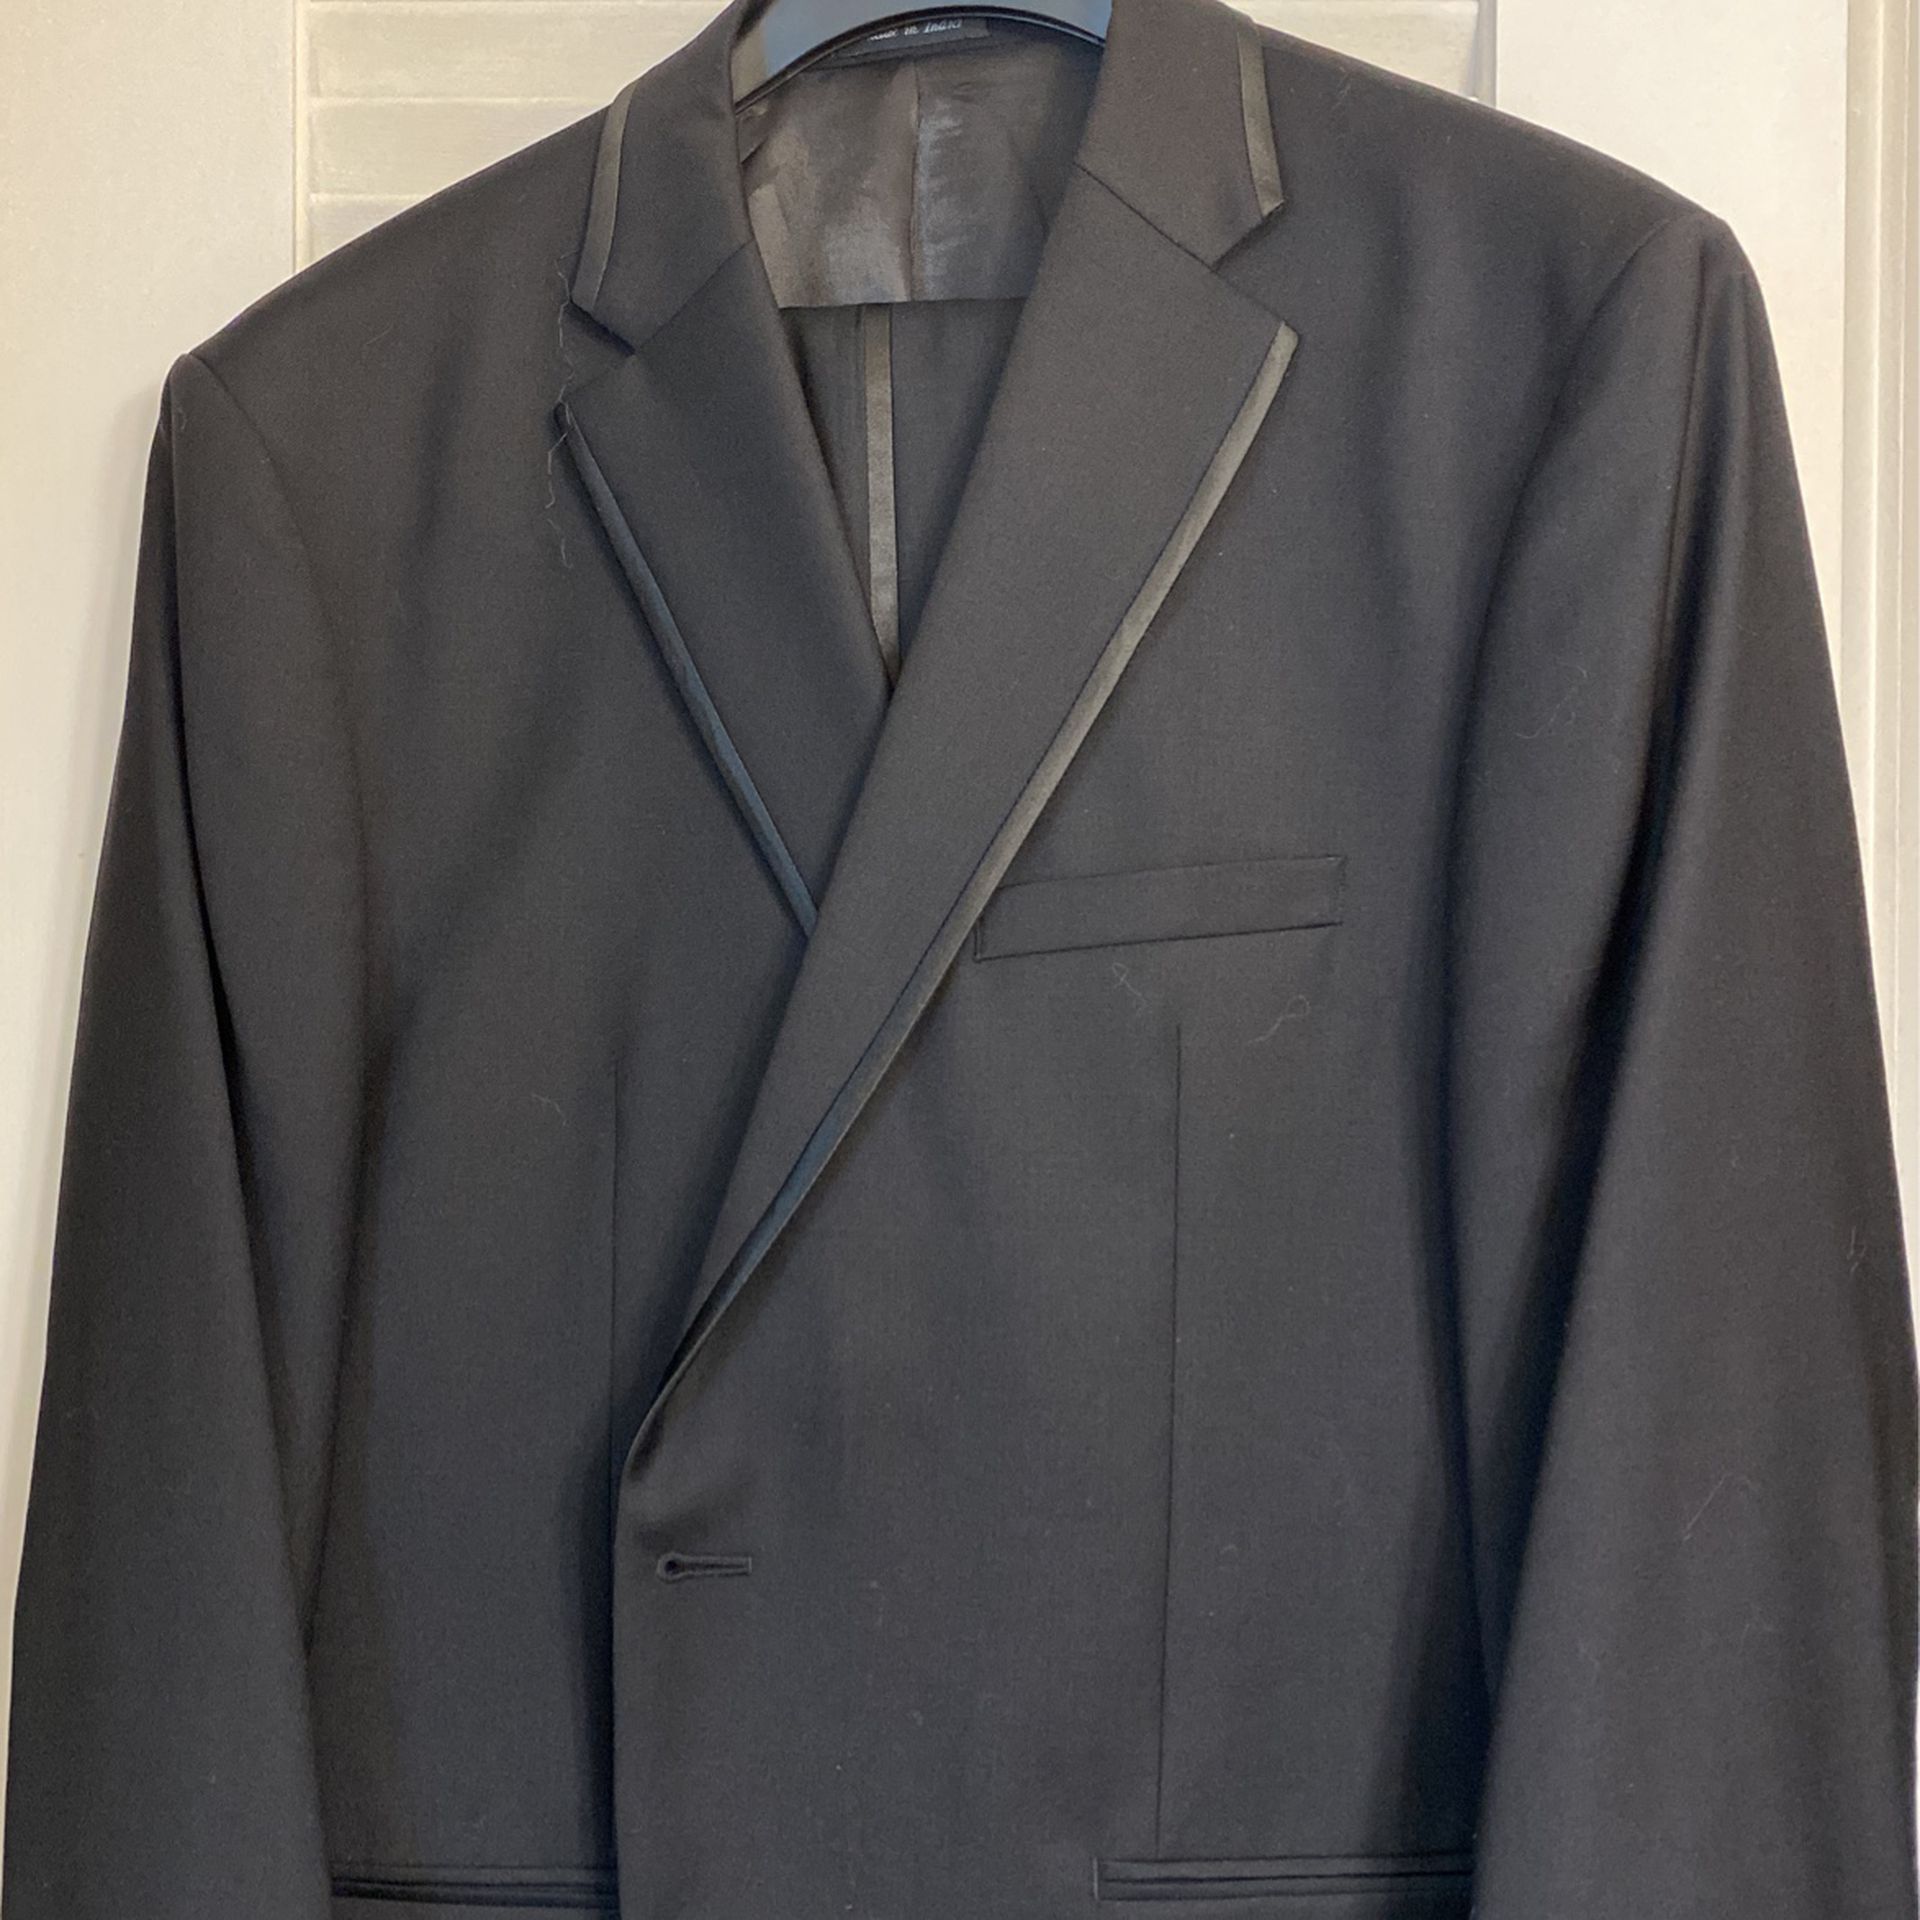 Calvin Klein Tuxedo Black . Buy This Get Another Suit Free.